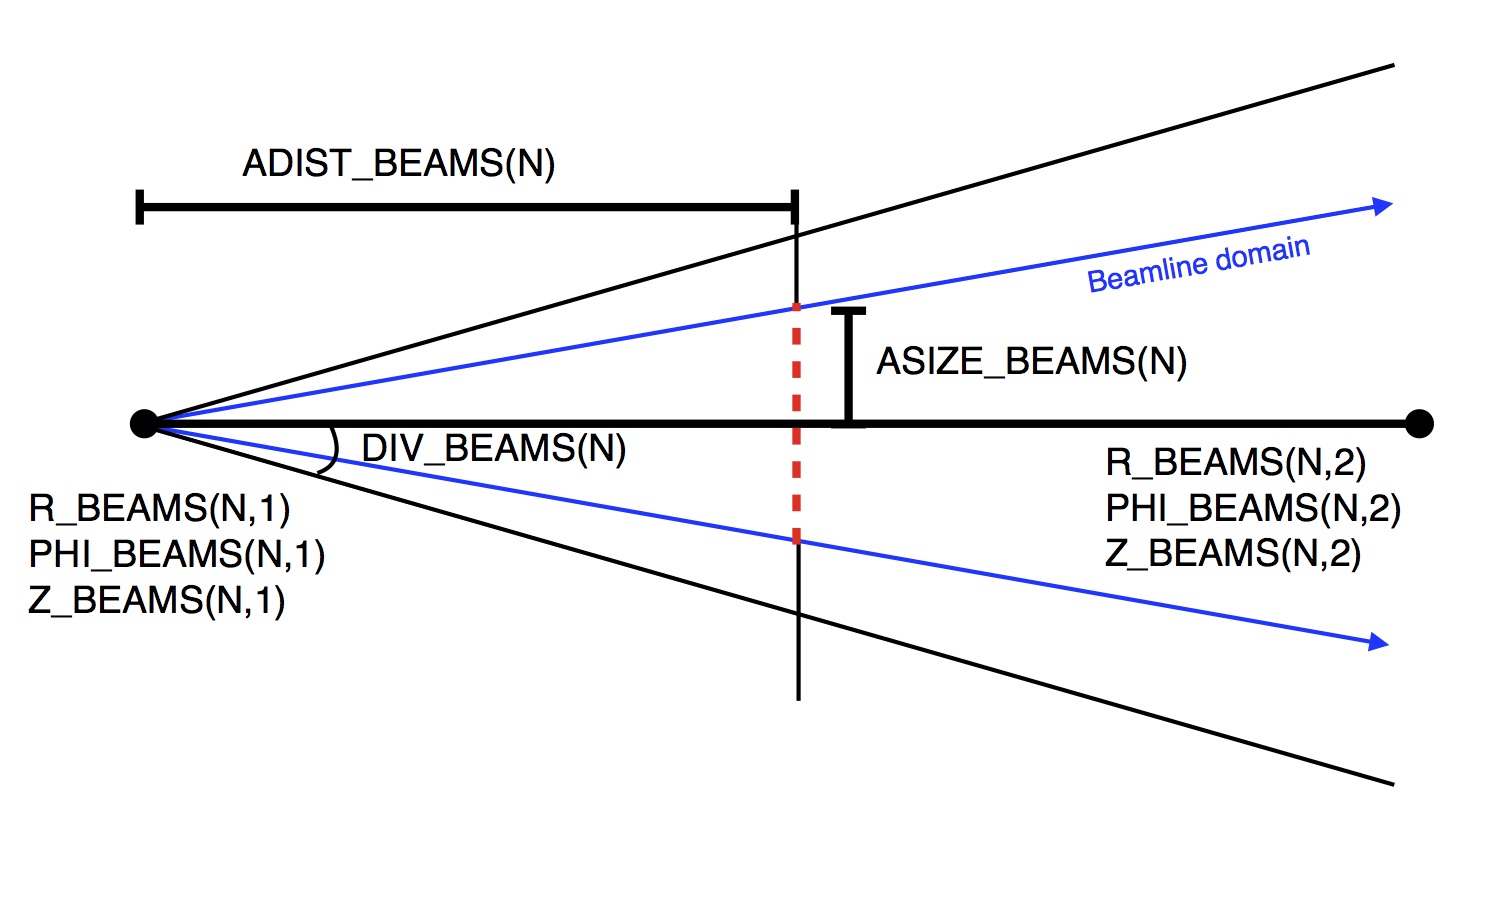  Diagram of neutral beam parameters showing how ASIZE_BEAMS, DIV_BEAMS, and ADIST_BEAMS are used to initialise neutral particles.